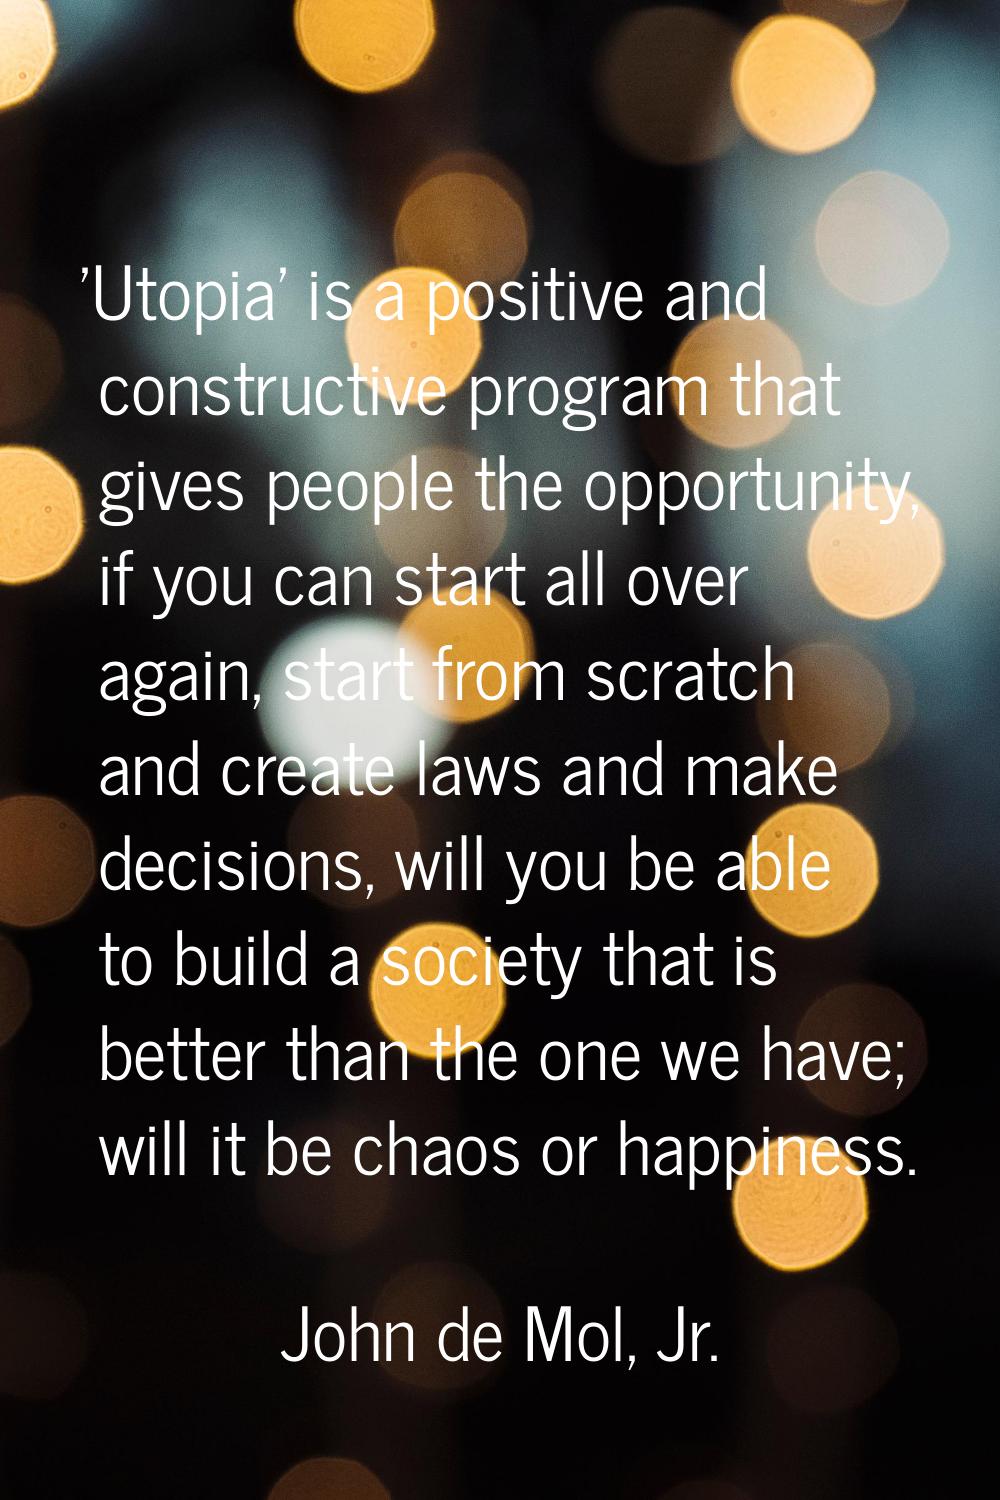 'Utopia' is a positive and constructive program that gives people the opportunity, if you can start